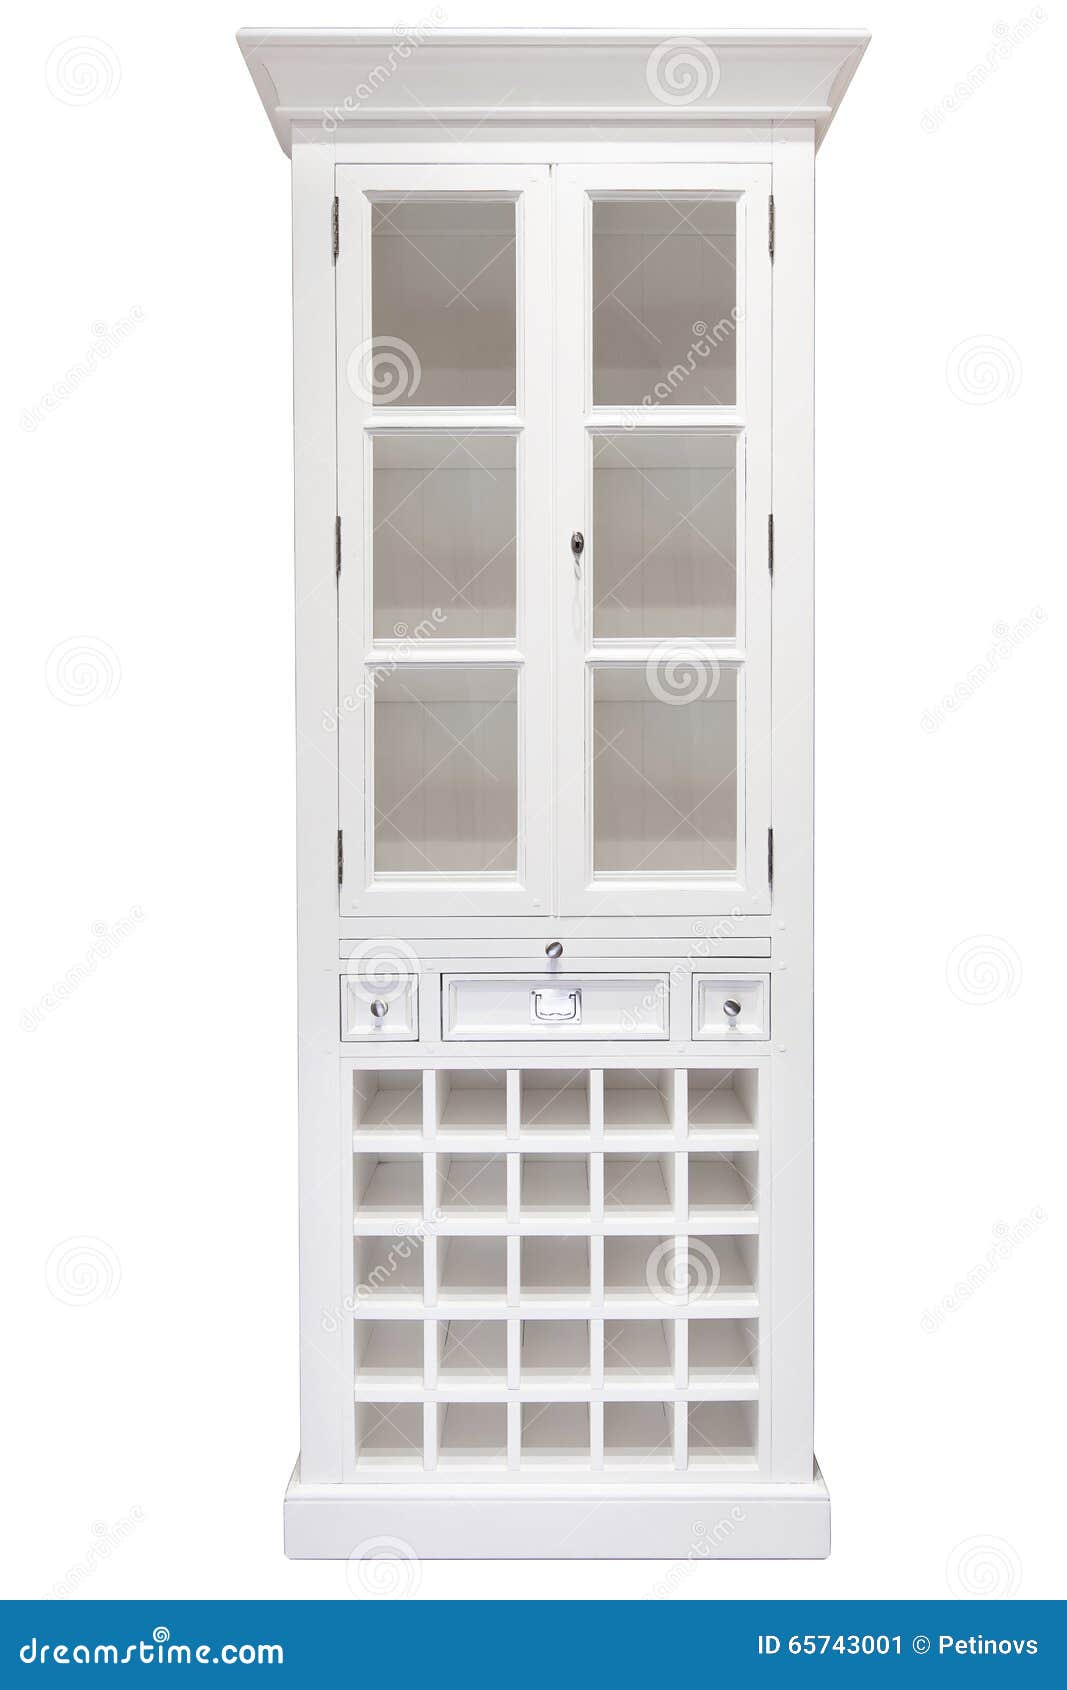 White Cupboard With Glass Doors Stock Image Image Of Background